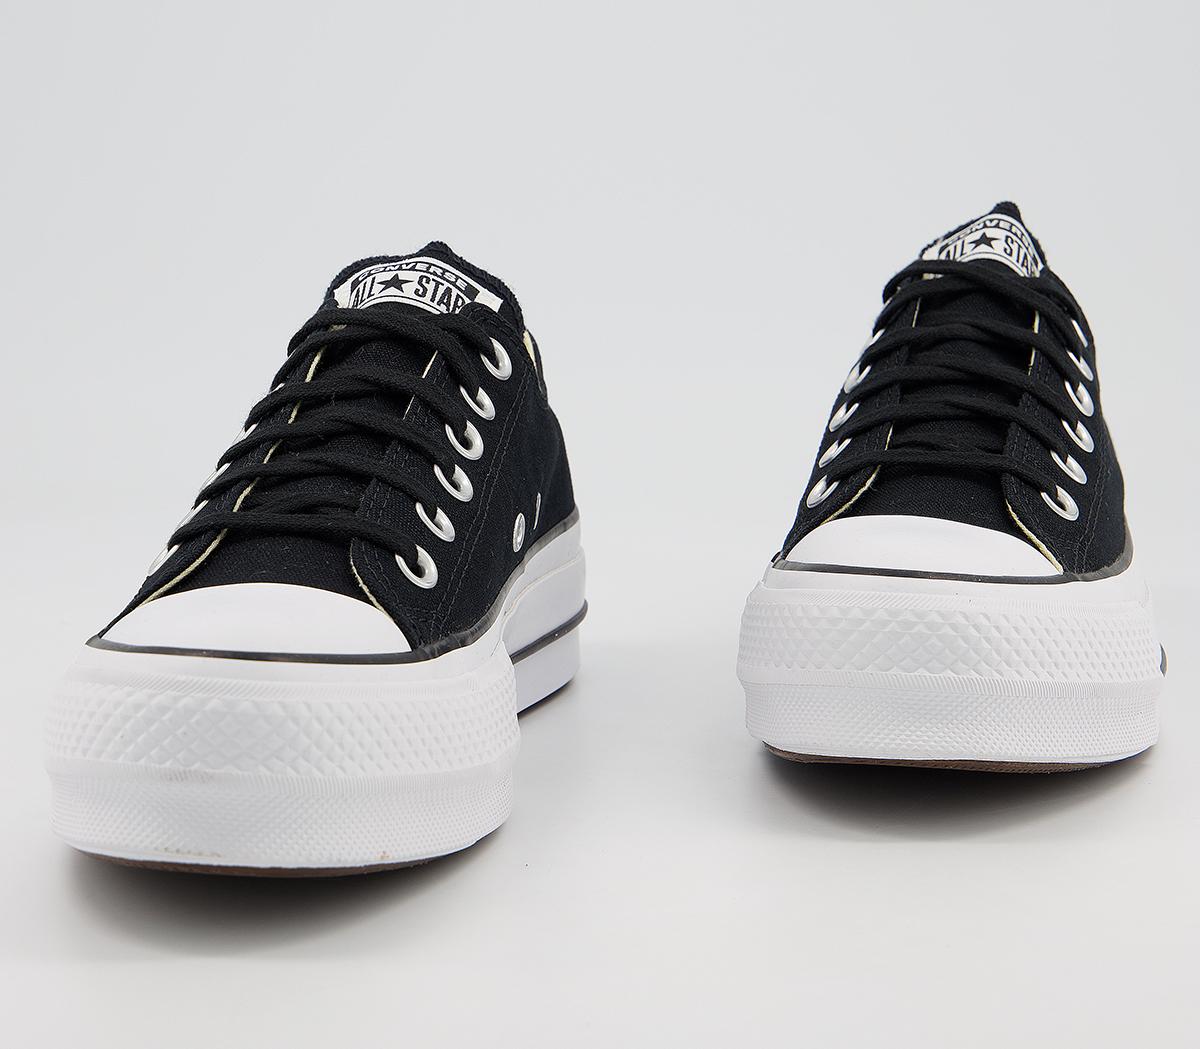 Converse All Star Low Platform Trainers Black Black White - Hers trainers